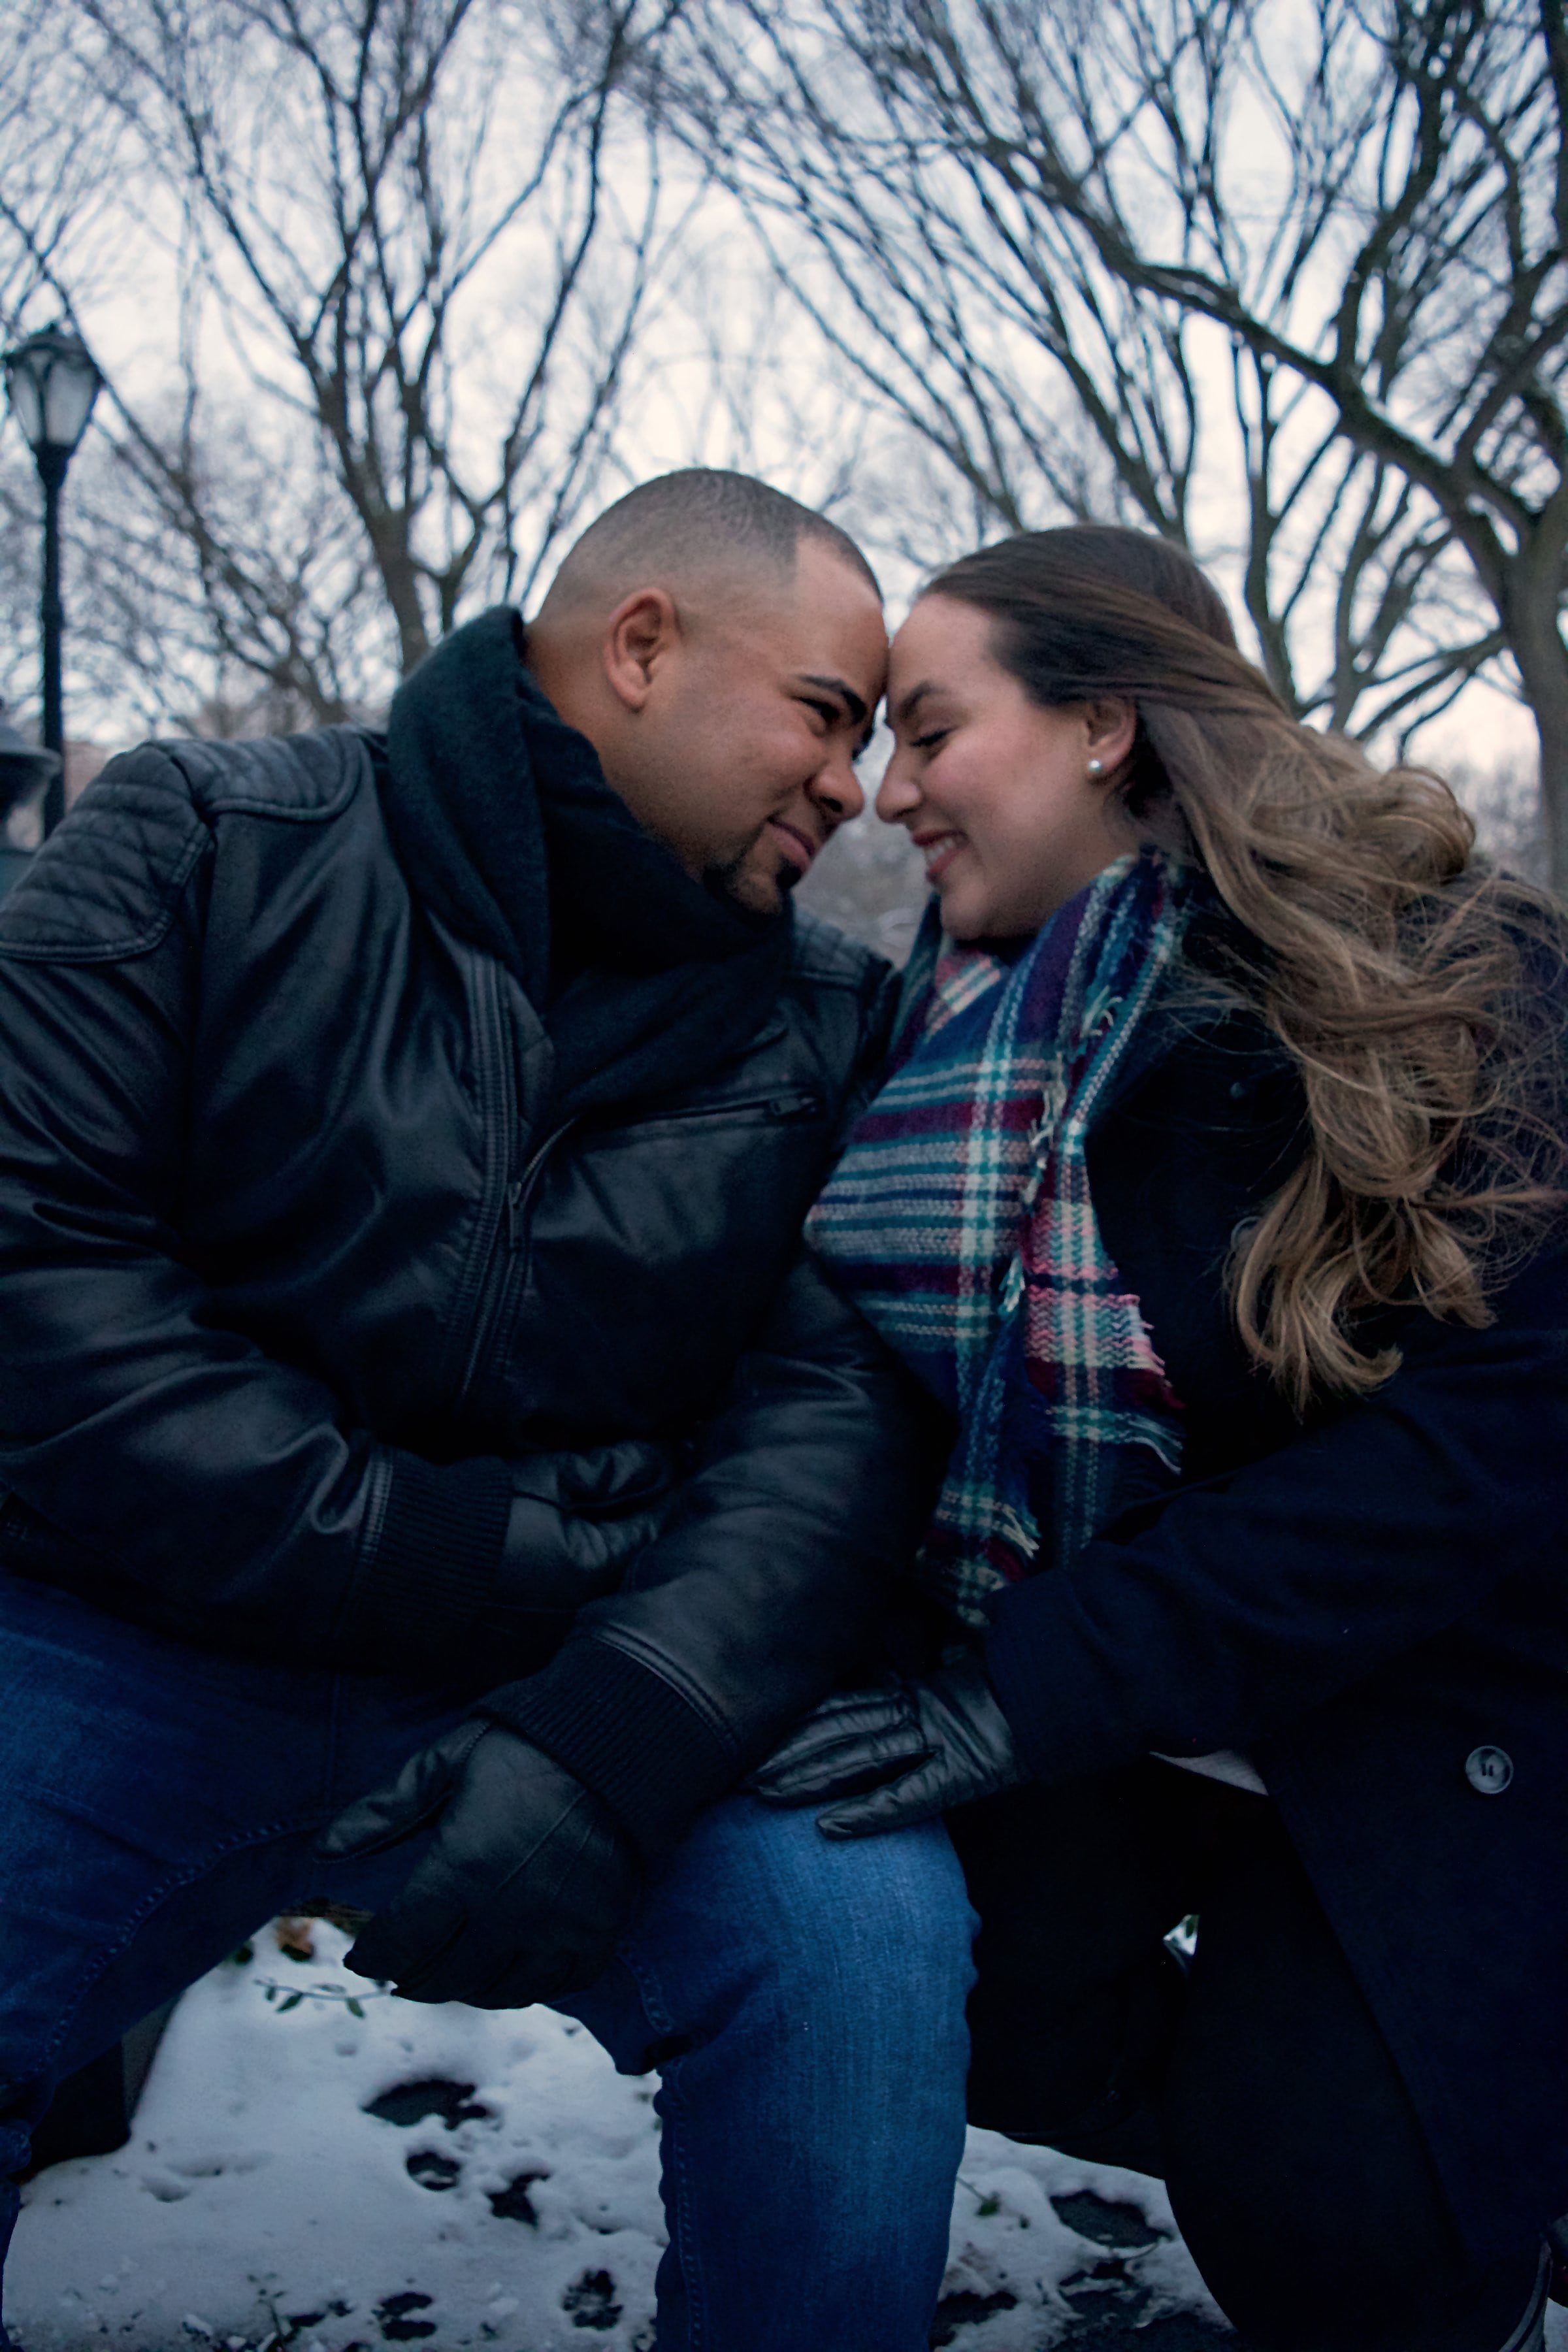  Married Couples Winter Engagement Session Photography Central Park Gapstow Bridge Literary Walk 